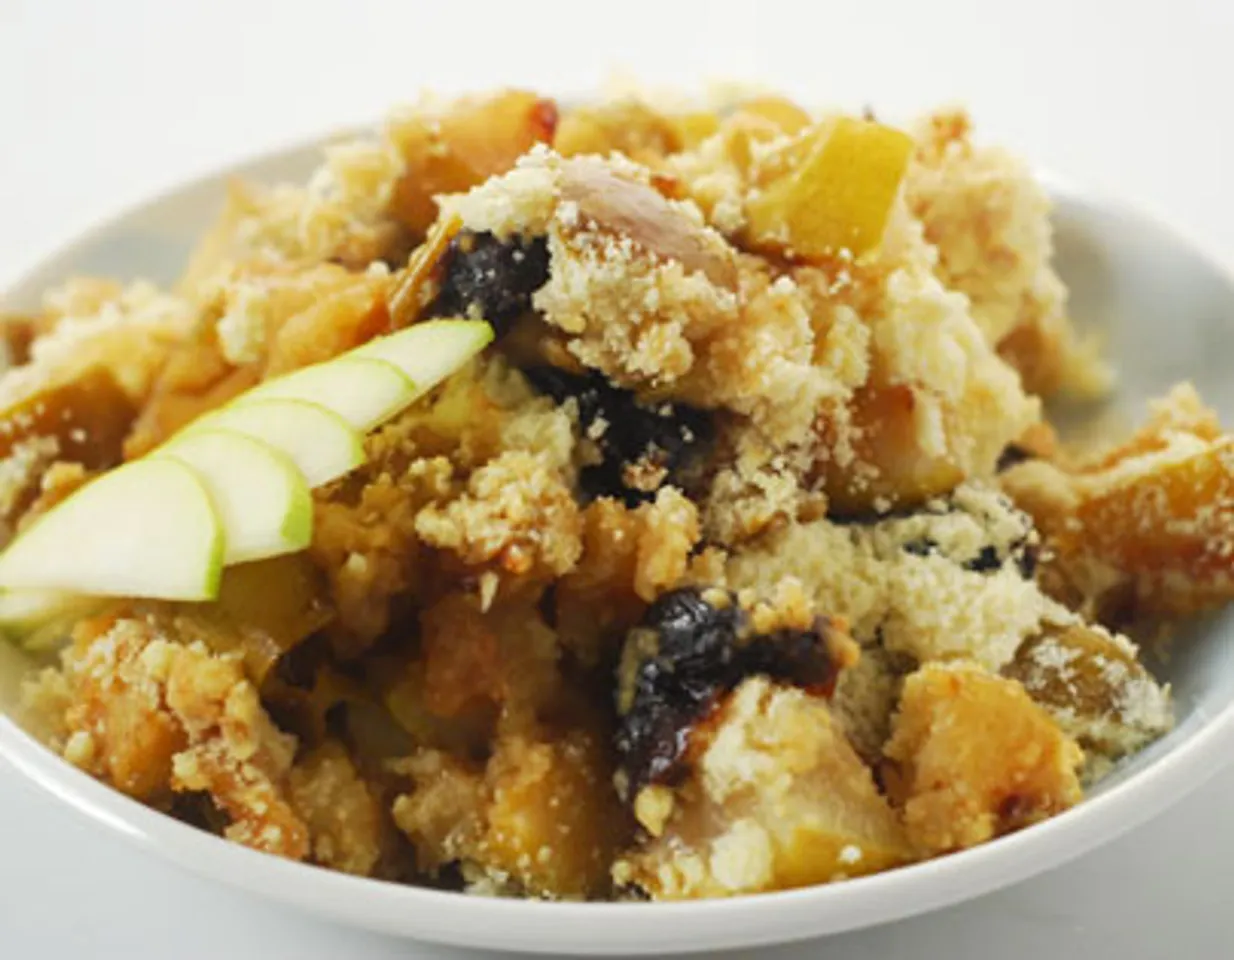 Prune and Pear Crumble